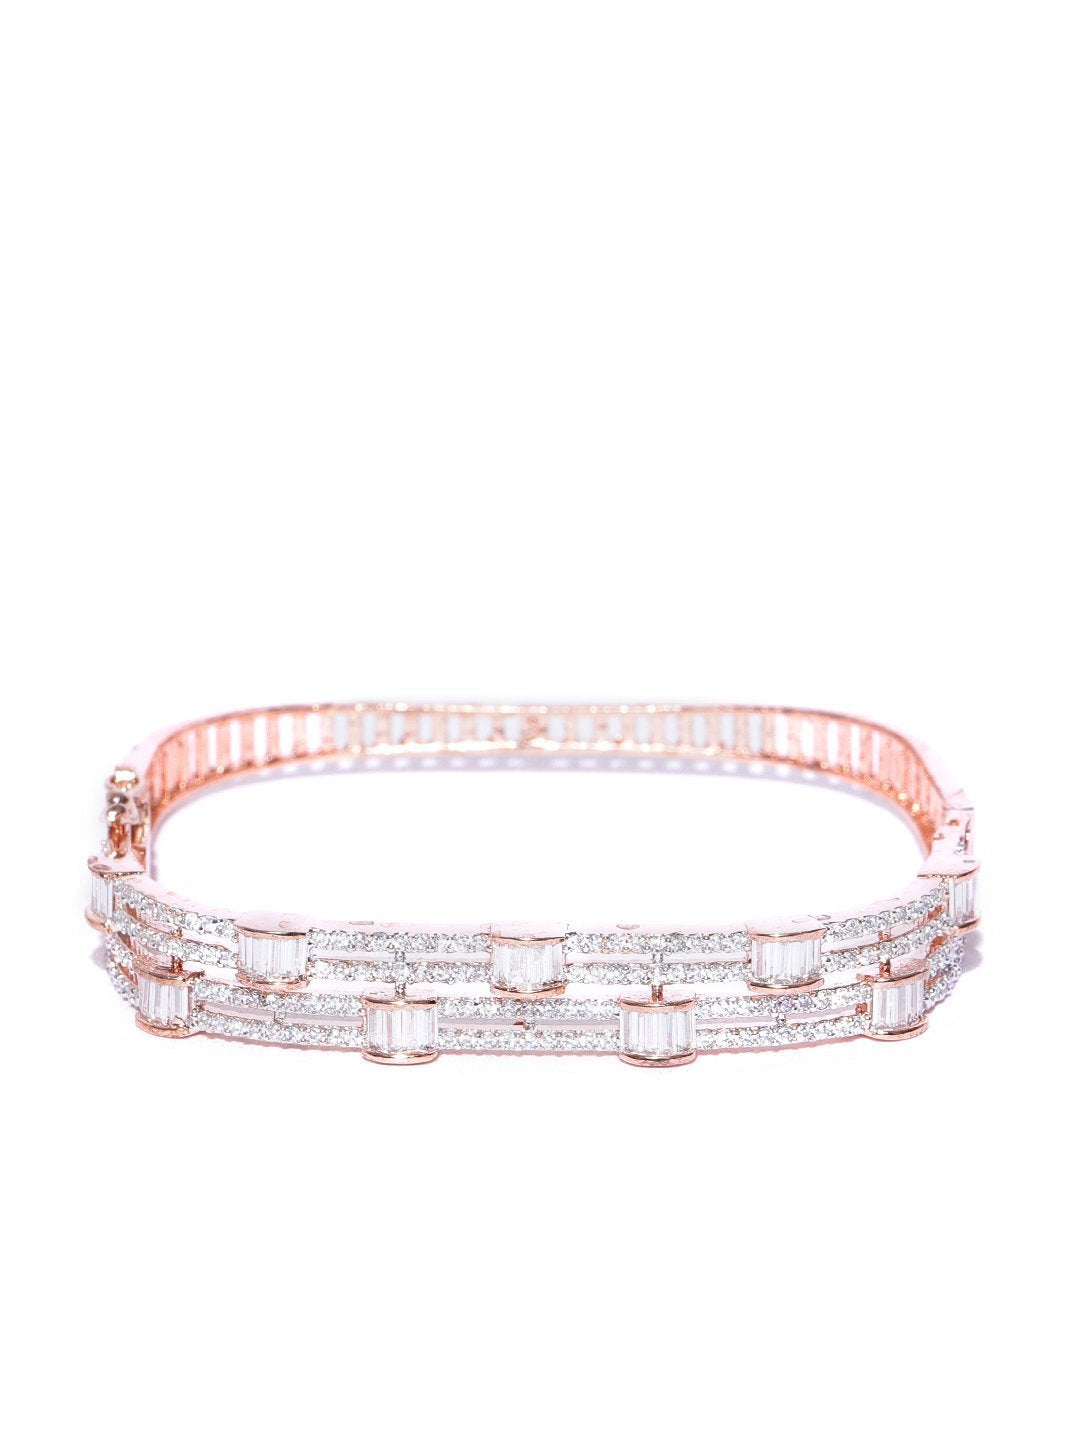 Women's Rose Gold-Plated American Diamond Studded Bracelet in Square Shape - Priyaasi